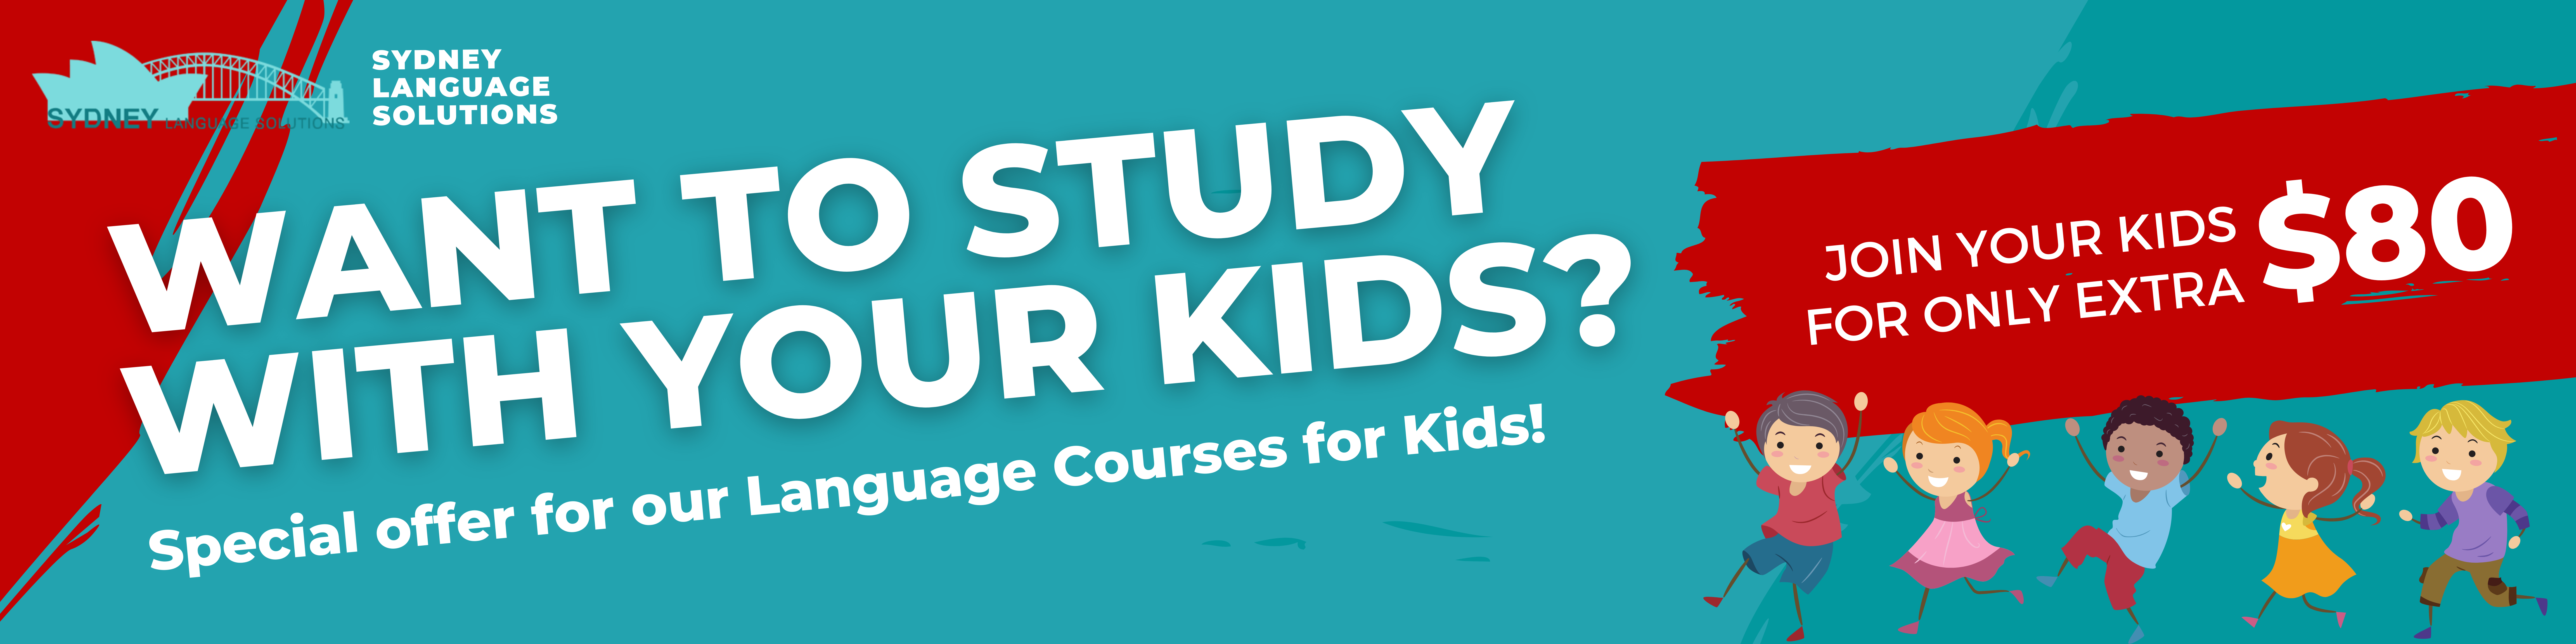 Online Language for Kids. Parents study with Kids a second language. Mandarin, Cantonese, Vietnamese, Japanese, Korean, Thai, Indonesian, Croatian, Spanish, Portuguese, Russian, German, Dutch for Kids online class Sydney CBD. Native Speakers, kids study with flashcards and activities